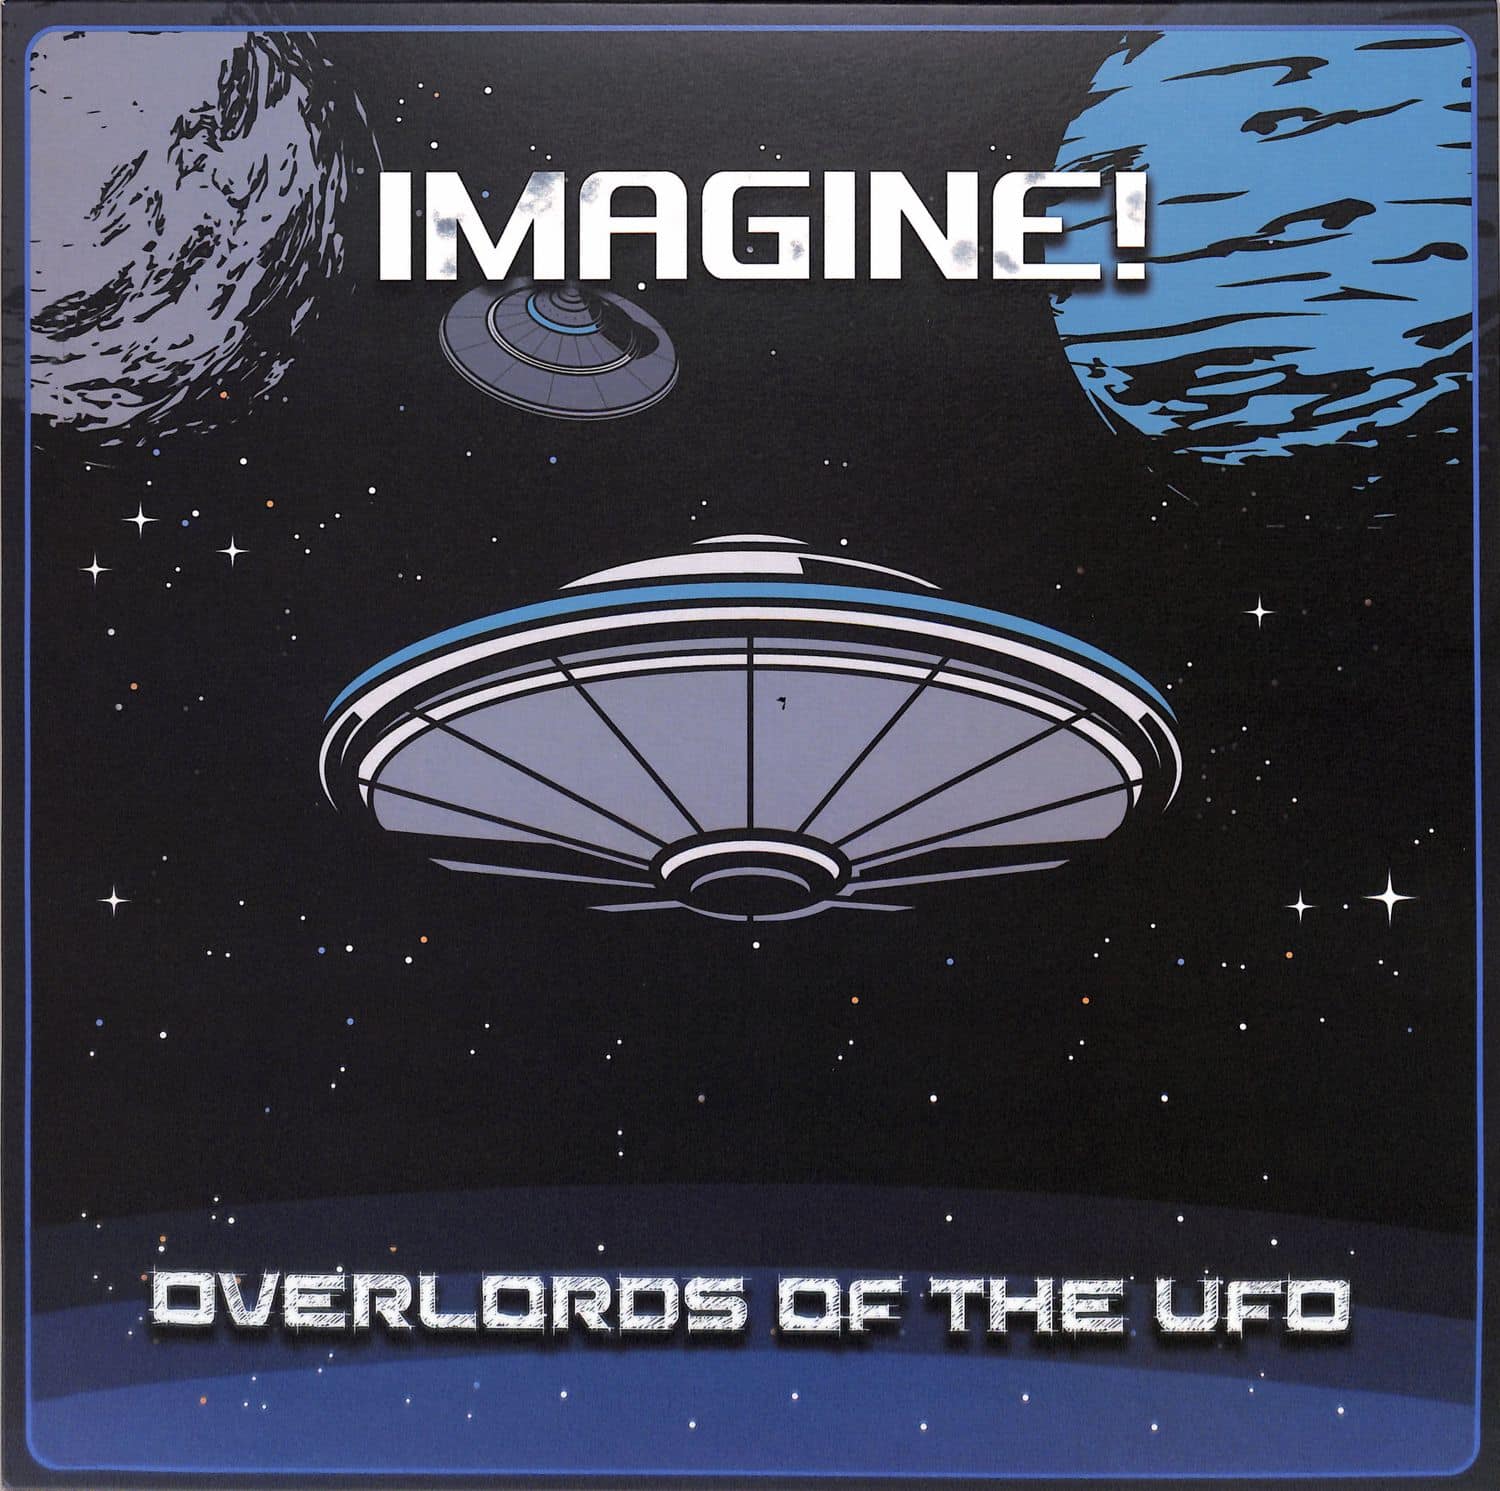 Overlords Of The UFO - IMAGINE!